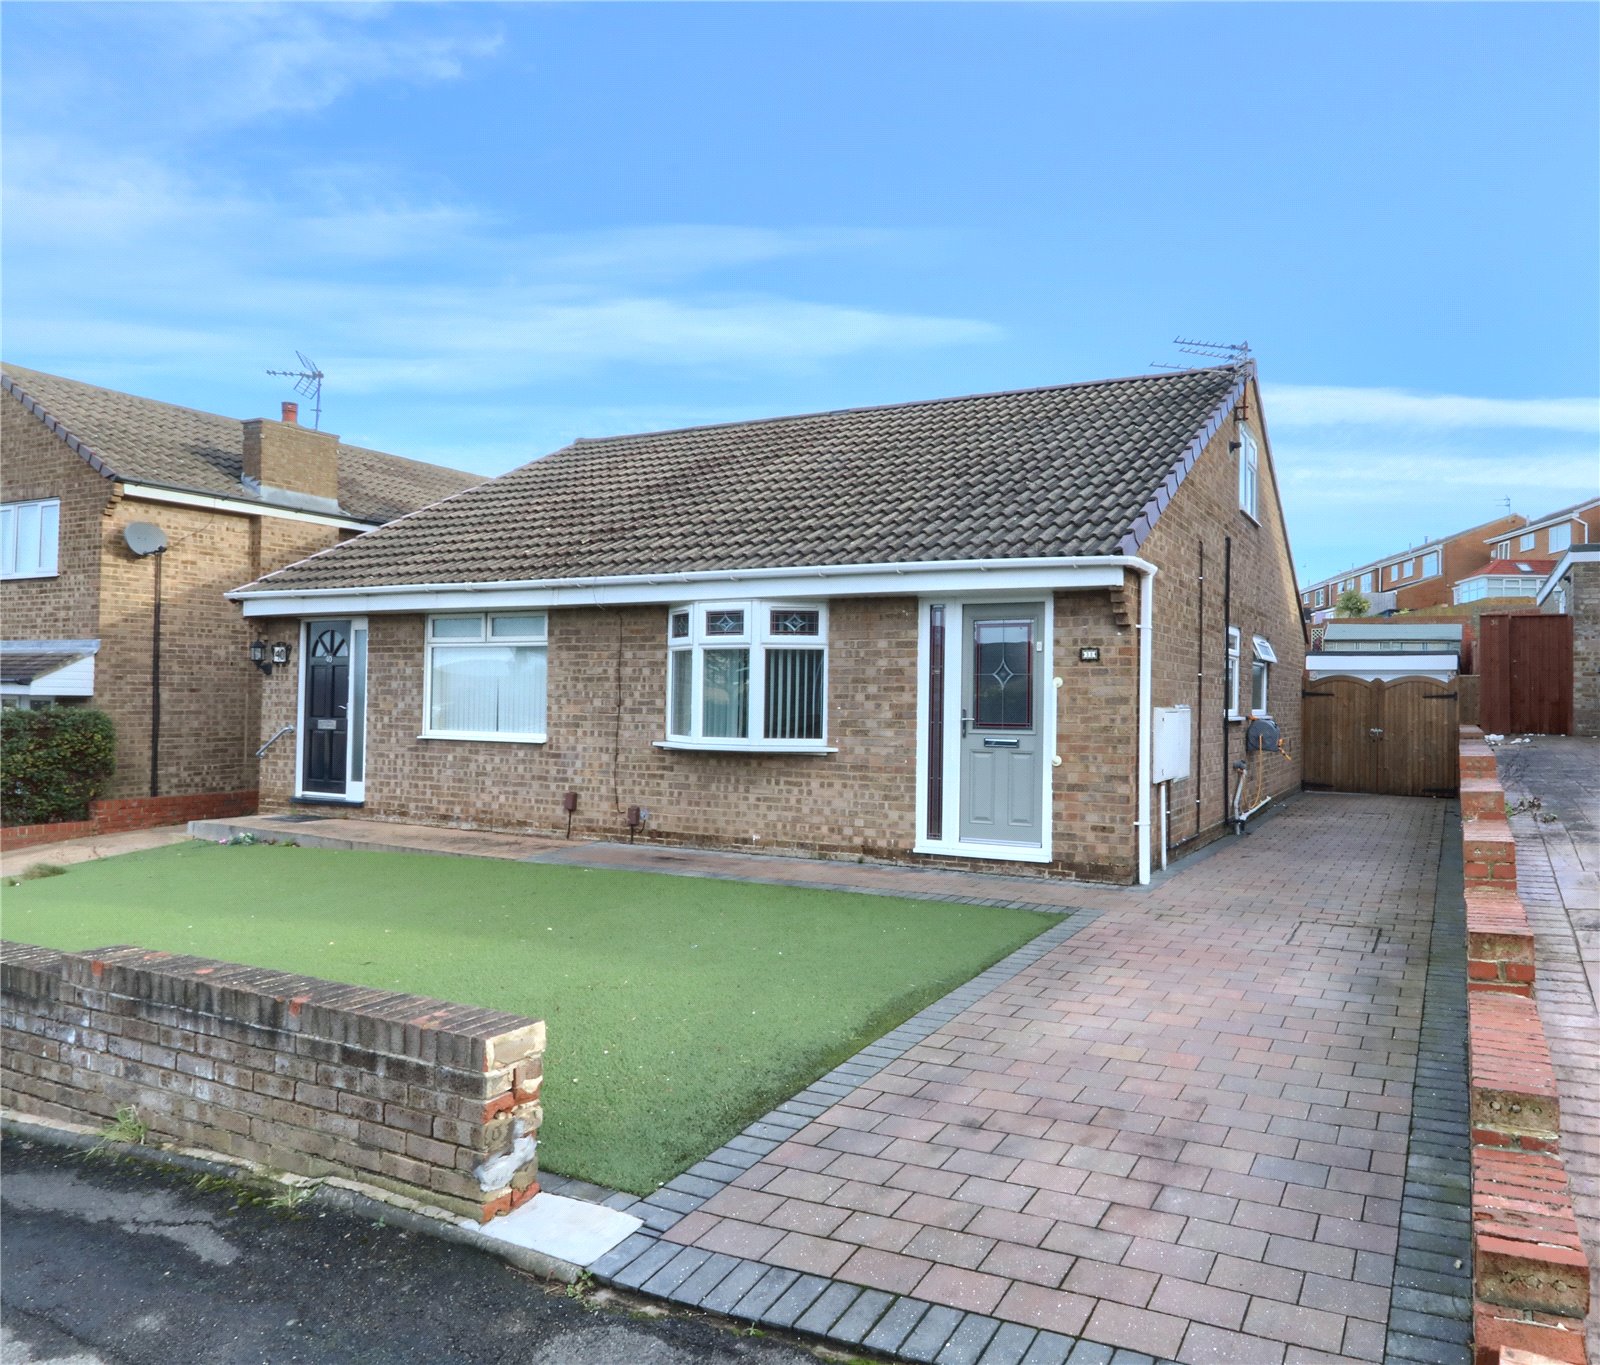 1 bed bungalow for sale in Meadowgate, Eston - Property Image 1